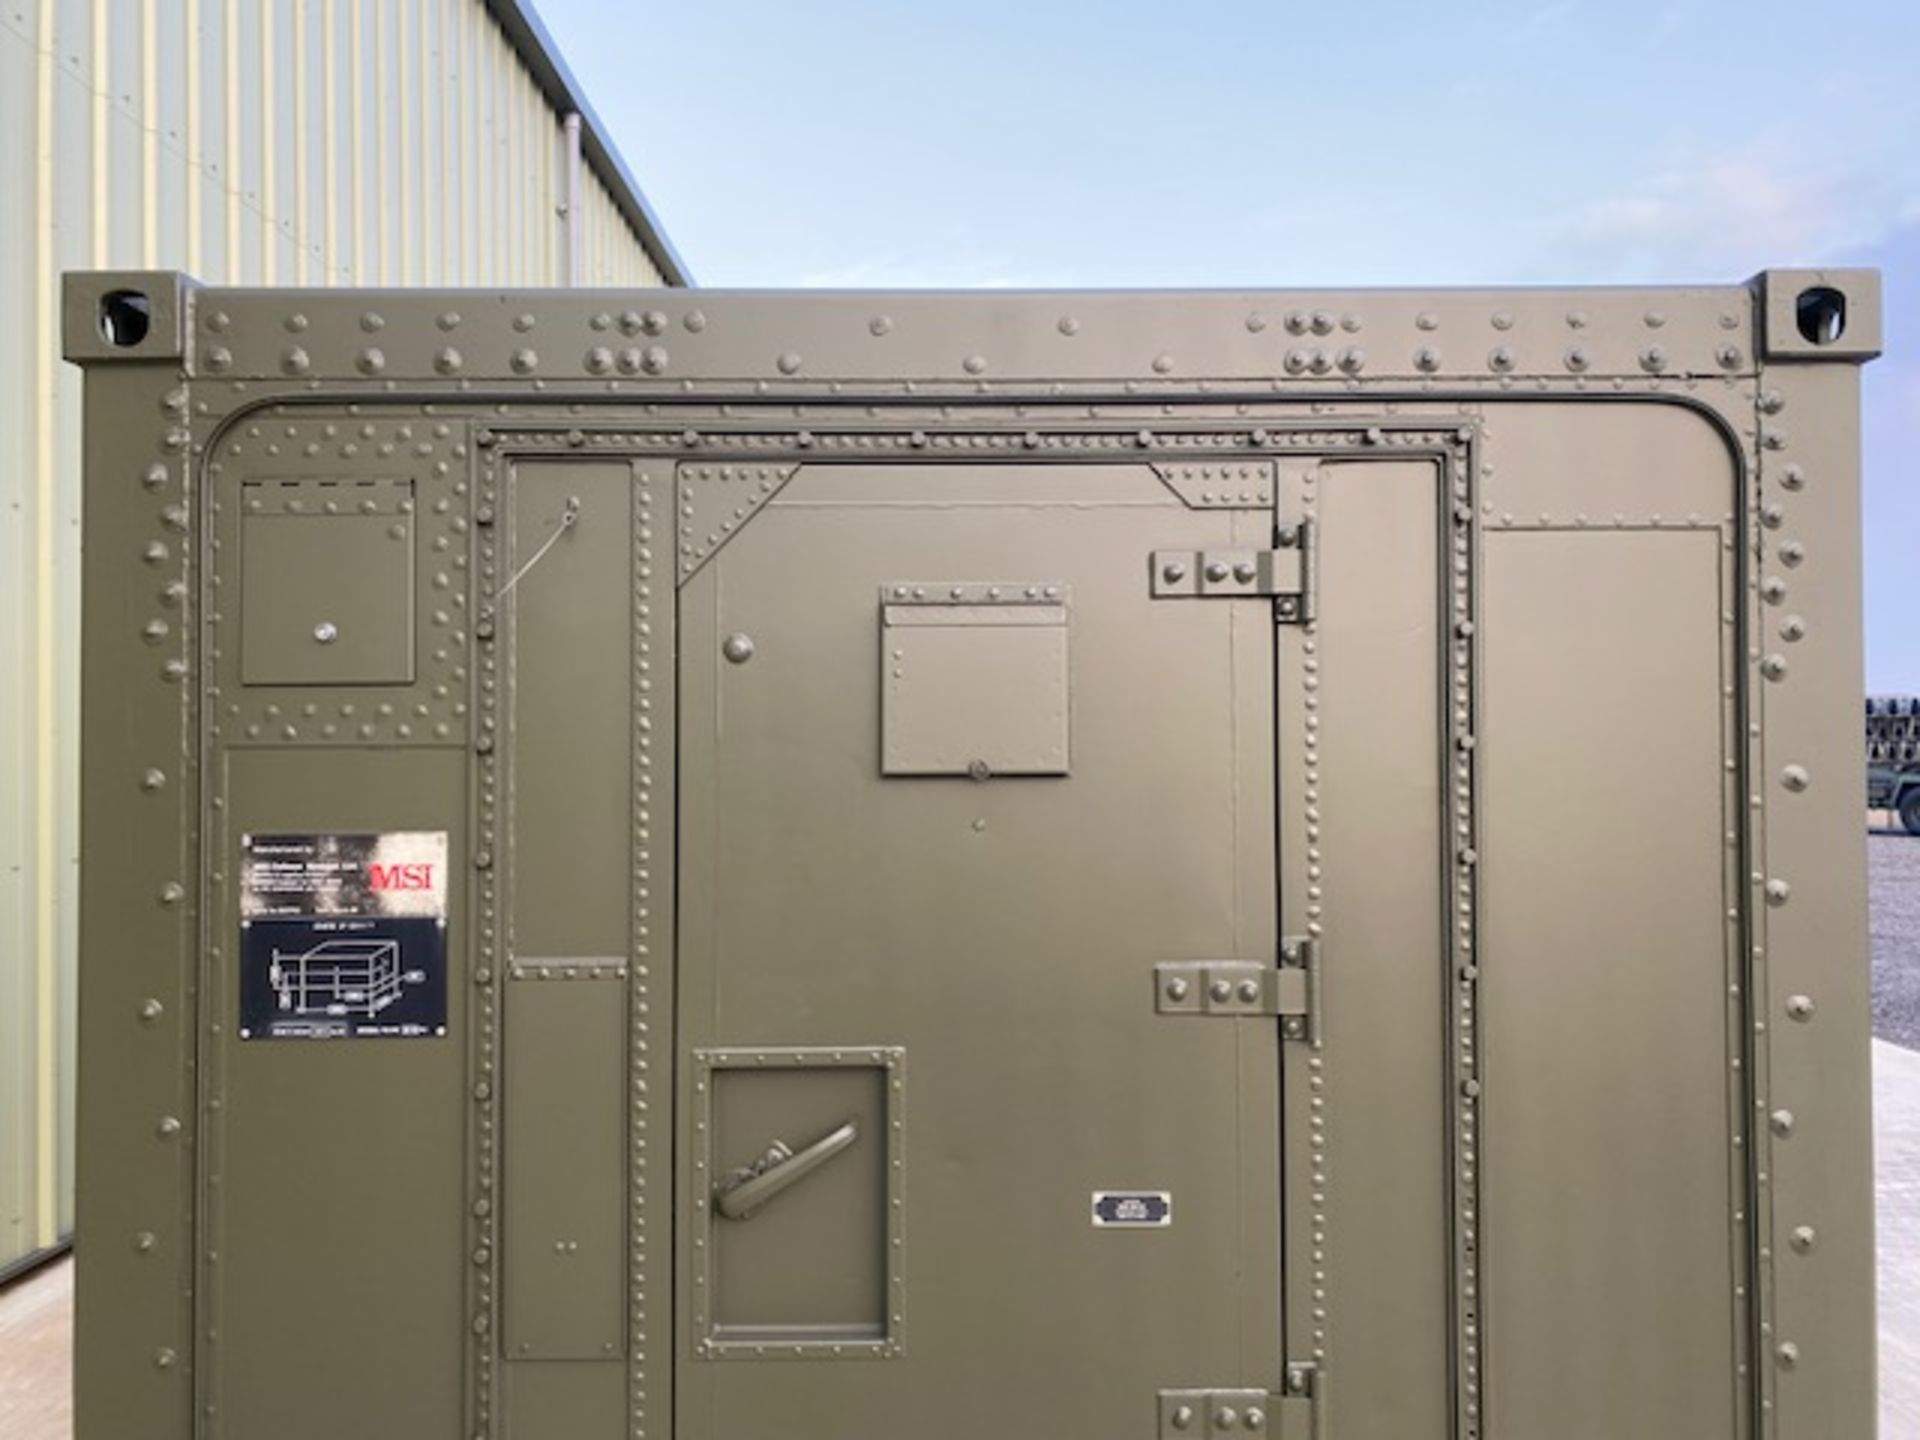 Transportable Lithium-ion Battery Storage & Charging Container From the UK Ministry of Defence - Image 13 of 65